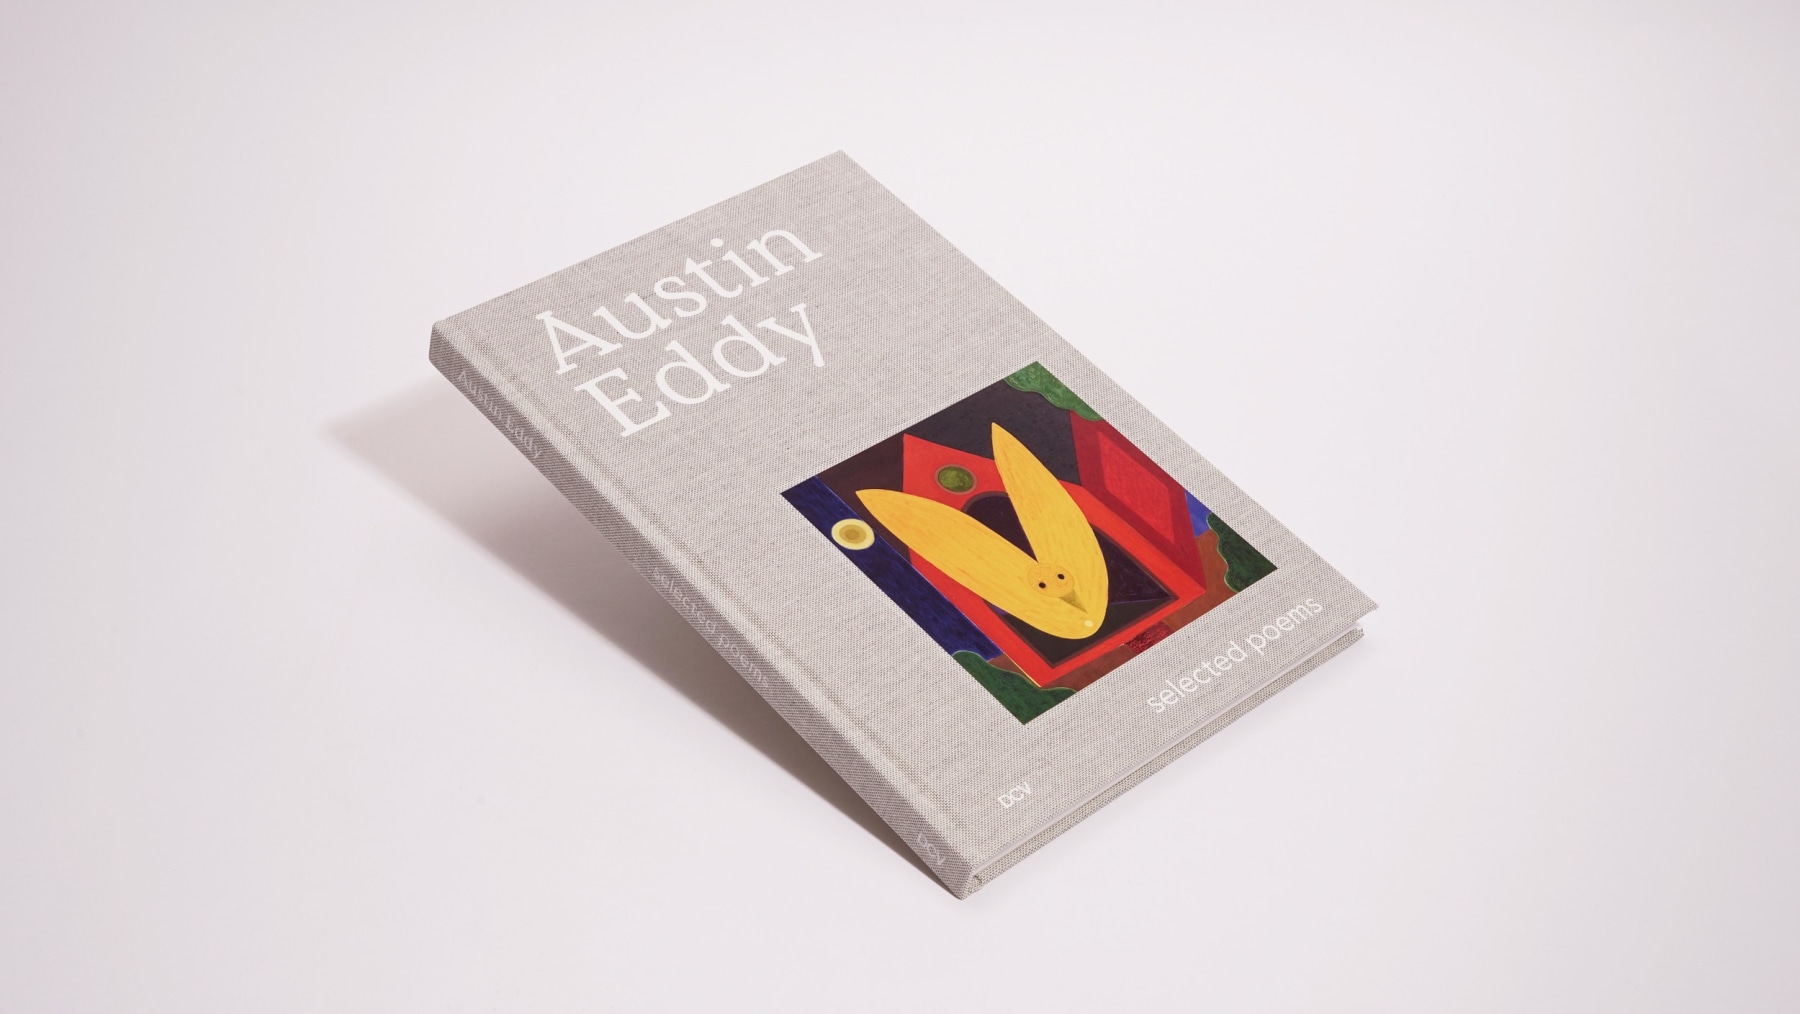 AUSTIN EDDY
selected poems

EDITOR: Galerie Eva Presenhuber
AUTHOR(S): Mitchell Anderson, Austin Eddy in conversation with Dodie Kazanjian
LANGUAGE: English
PUBLISHER: DCV Books

Purchase here